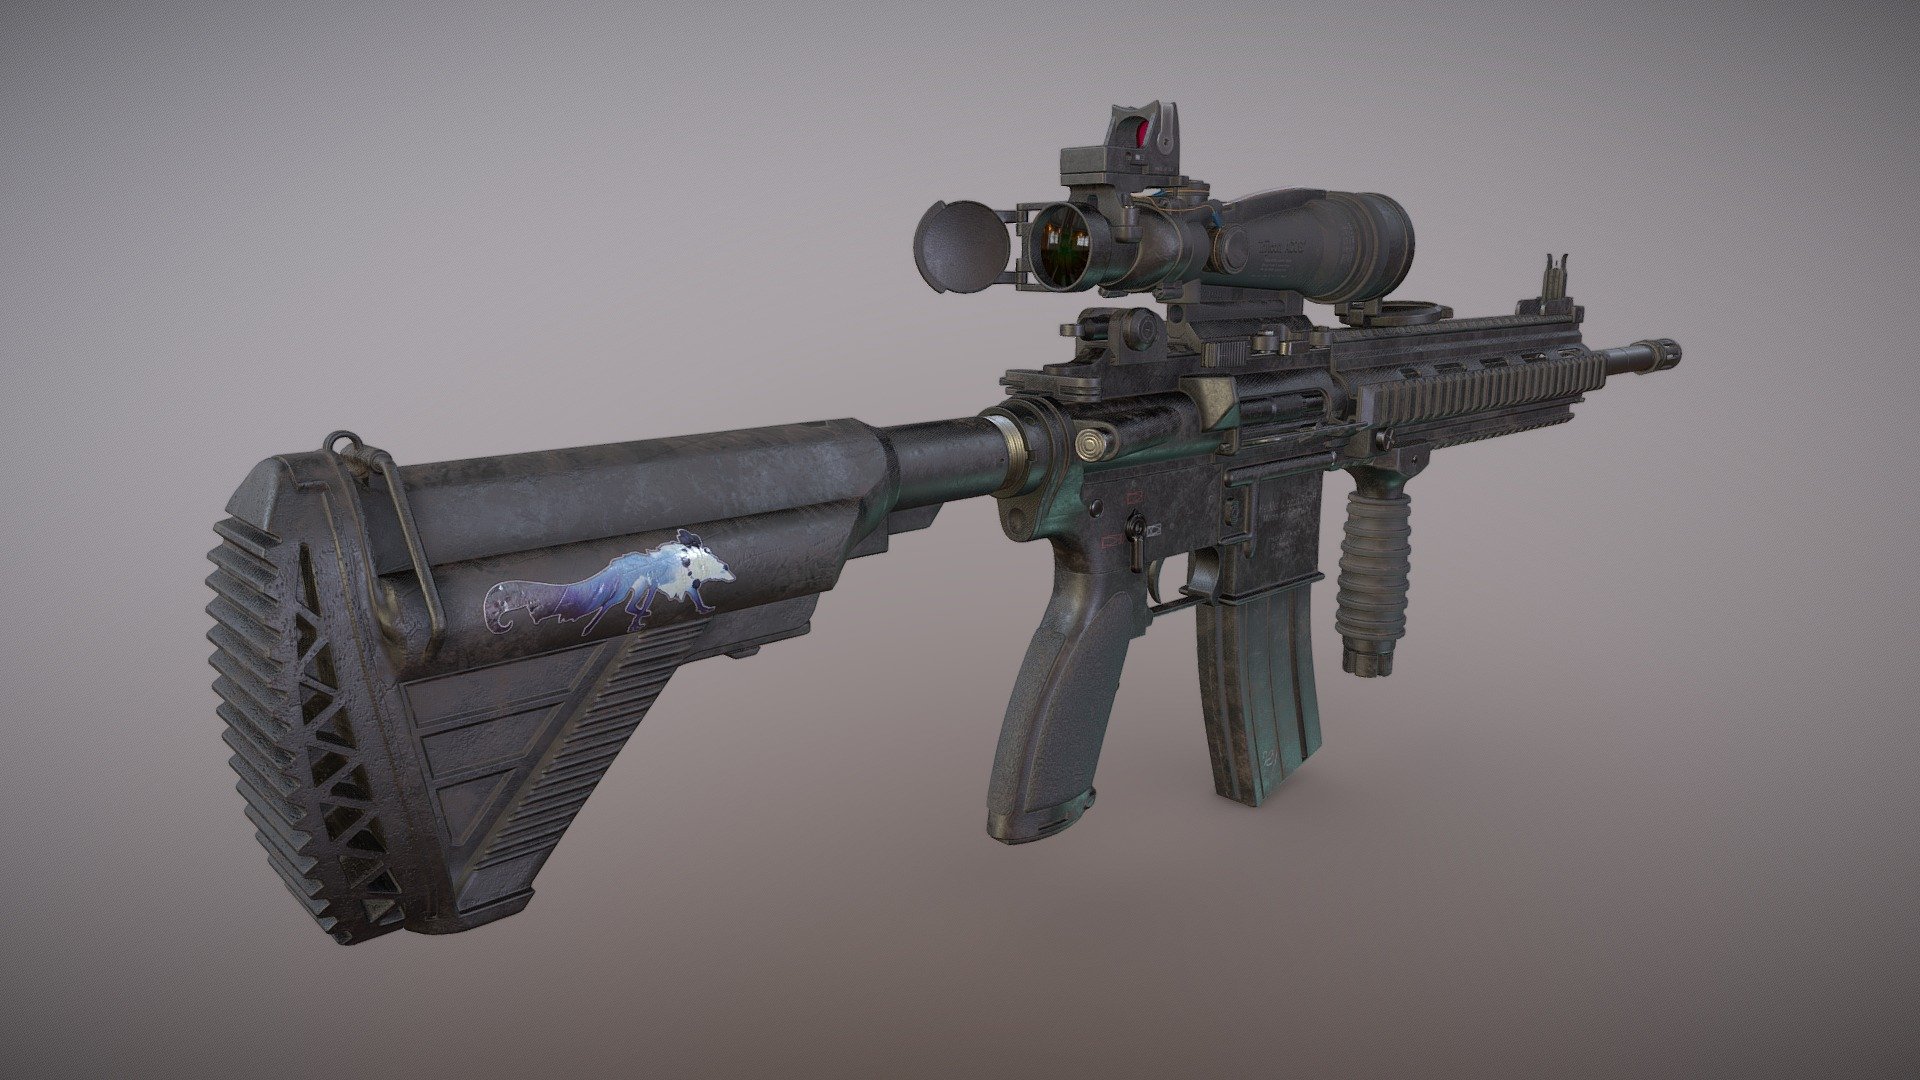 The M27 IAR with Trijicon ACOG rifle scope, red-dot, front and hind eye-sights.
This is a long pending personal project initially started as a weapon asset for gaming, but ended up working with multiple texture maps through UDIM workflow, with an efficient skill up in materials study, details and light reaction to materials.
So after multiple experiments, failures and system constraints this turn out to be the output.
Sticker source : Pinterest - Infantry Automatic Rifle - Download Free 3D model by Skyfox13 (@podderkuntal25) 3d model